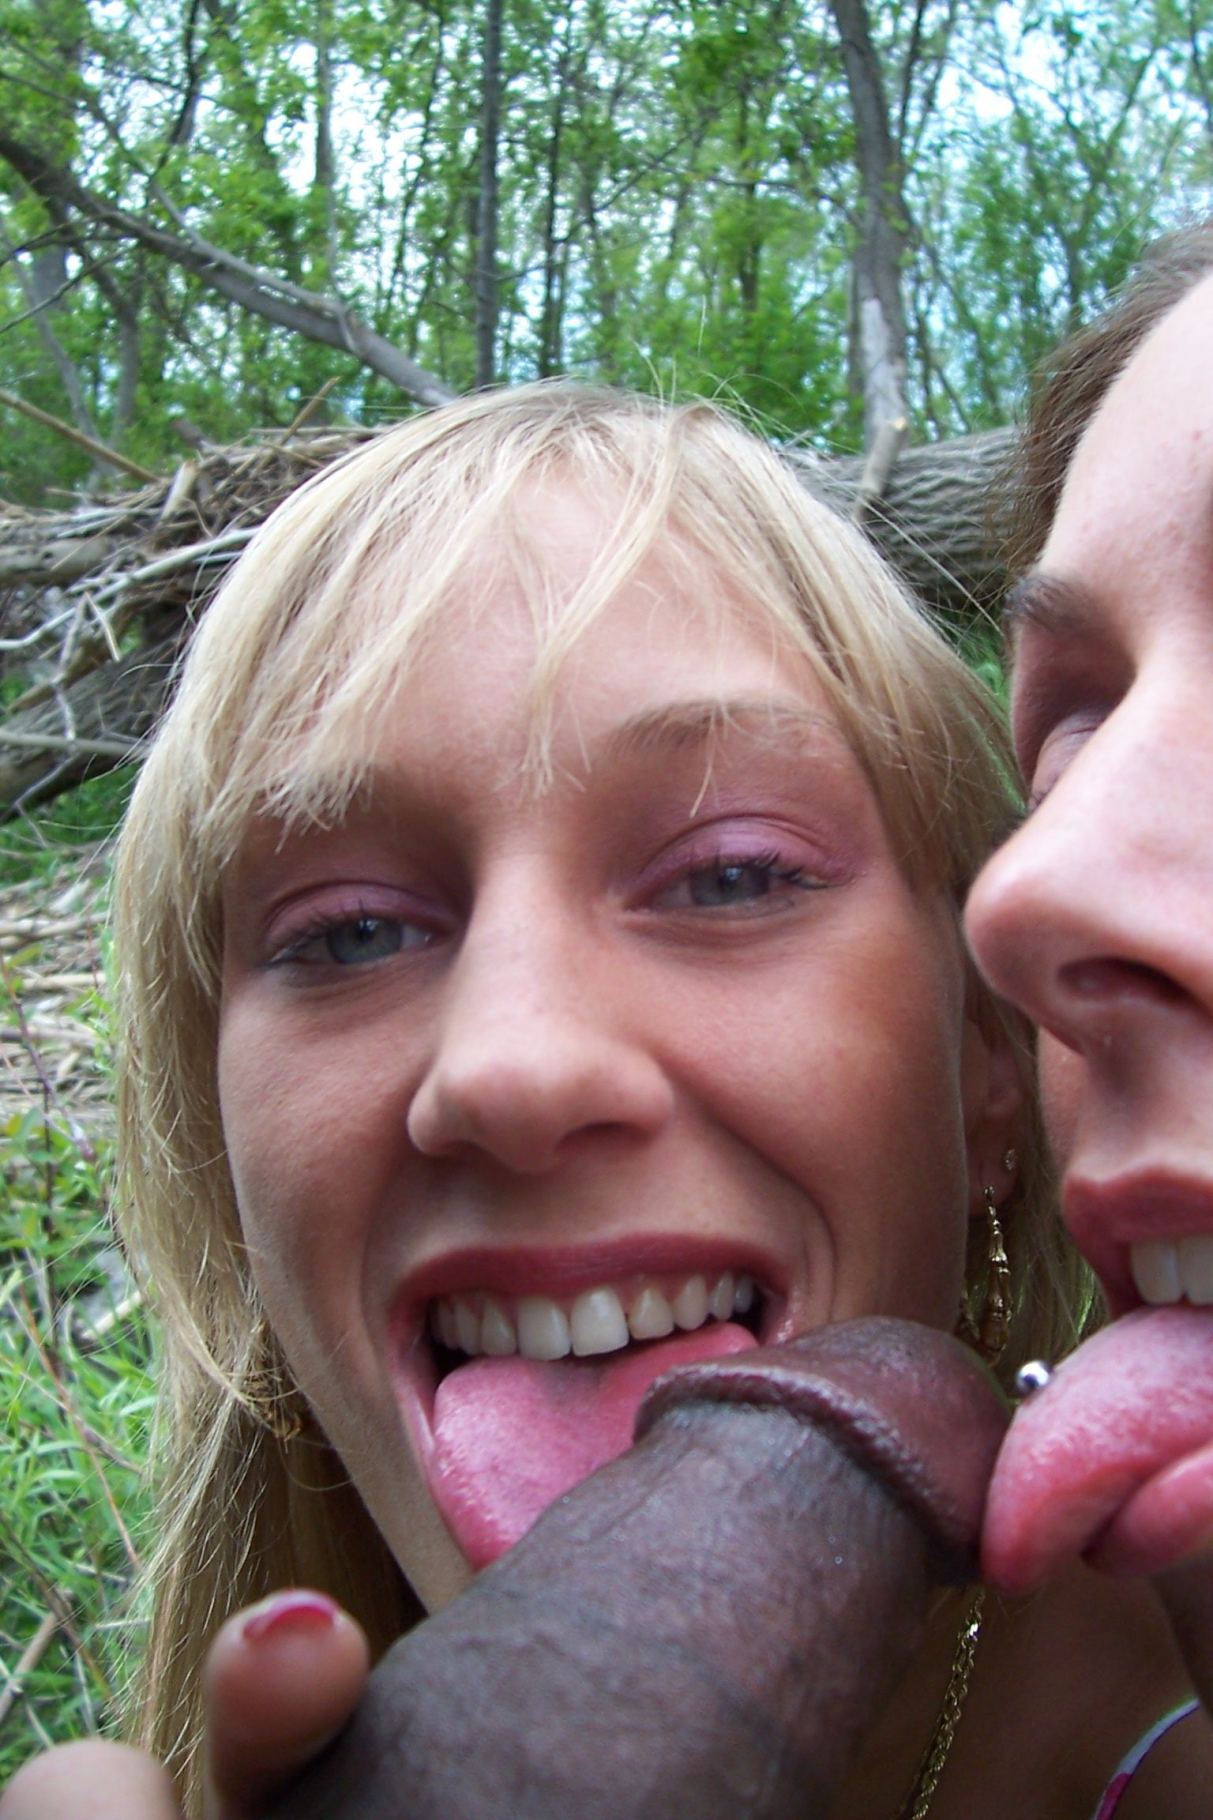 Amateur girl want to suck dick11.jpg